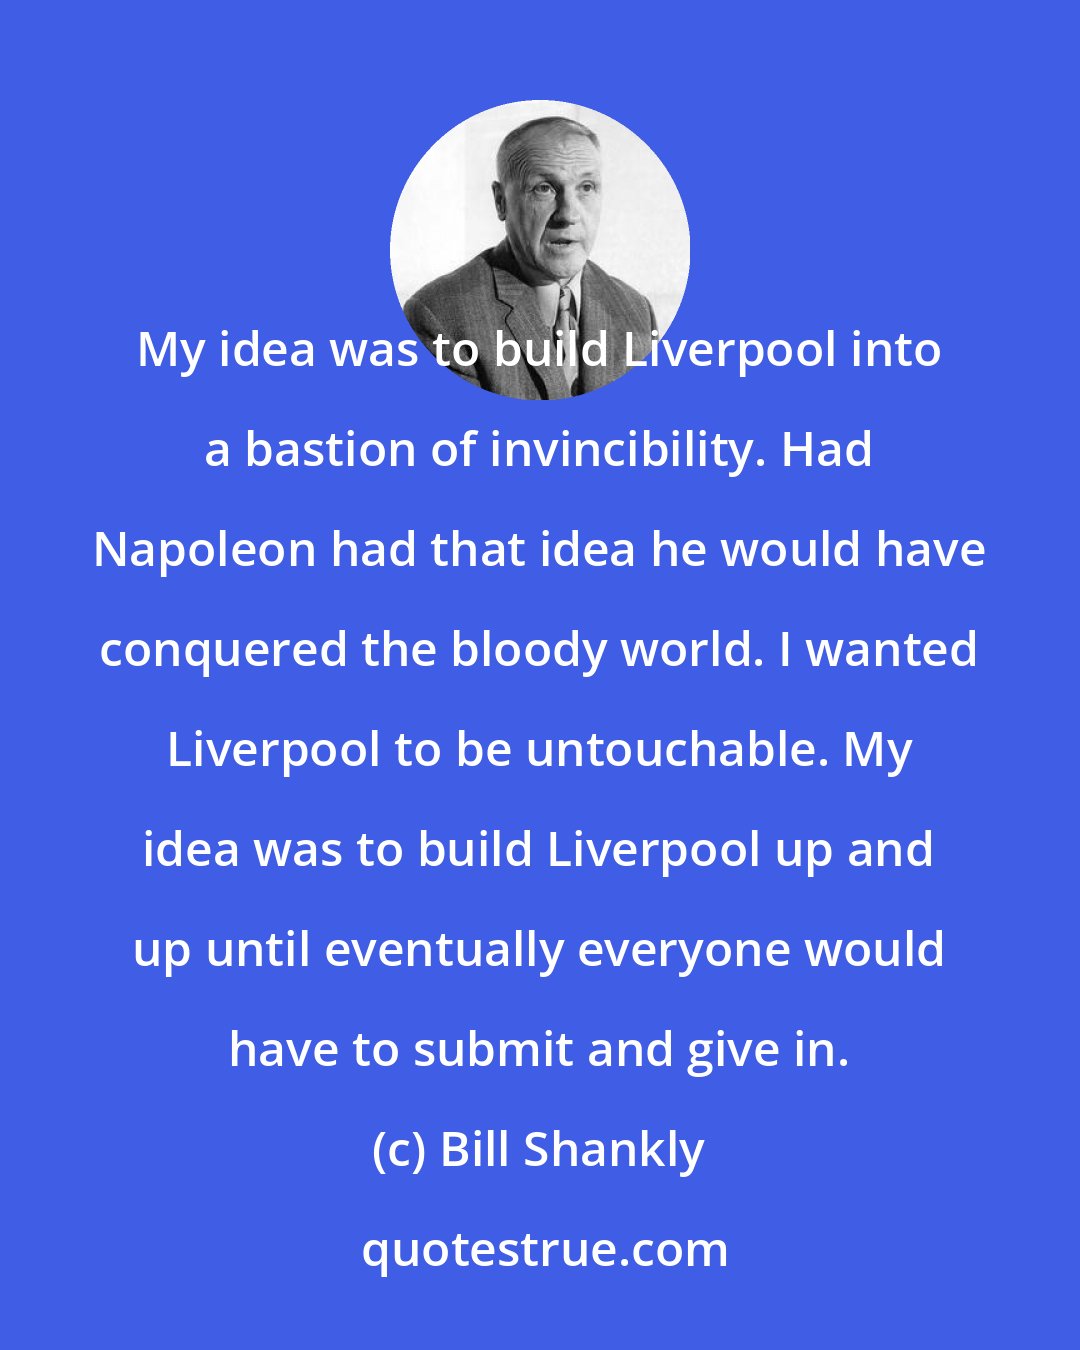 Bill Shankly: My idea was to build Liverpool into a bastion of invincibility. Had Napoleon had that idea he would have conquered the bloody world. I wanted Liverpool to be untouchable. My idea was to build Liverpool up and up until eventually everyone would have to submit and give in.